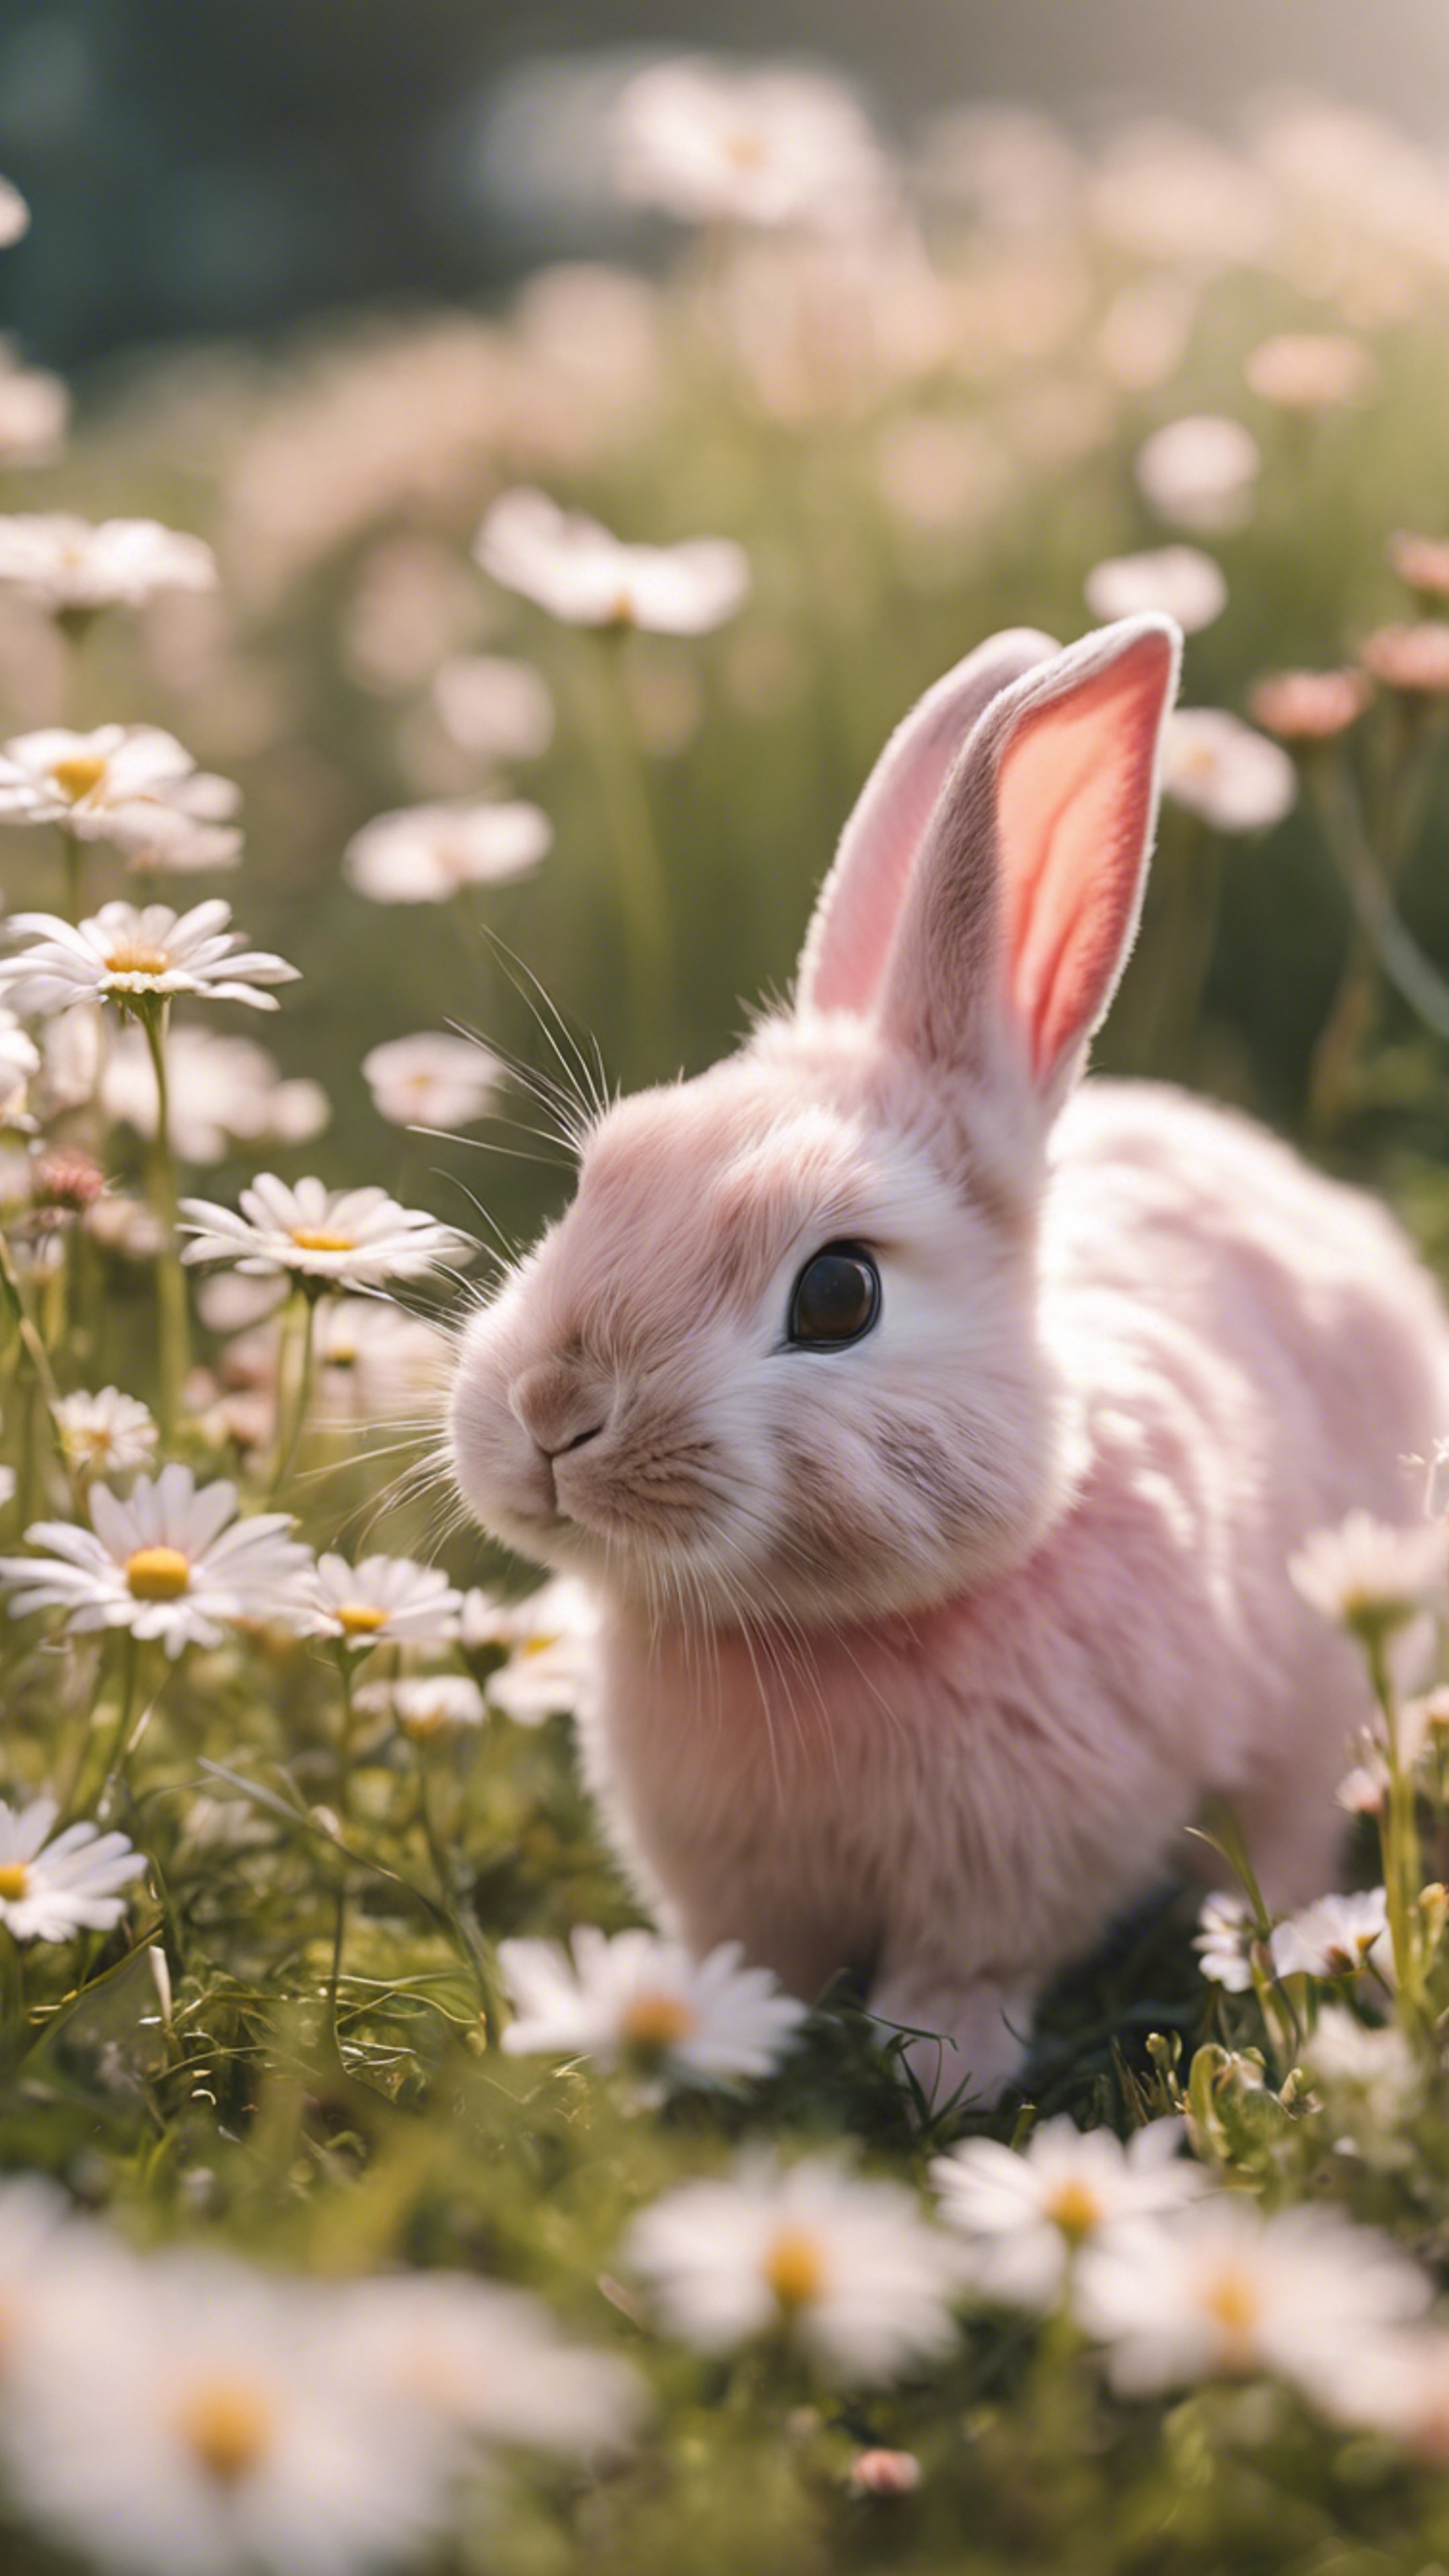 A pack of blush pink, Kawaii style rabbits happily playing in a field of daisies. Hintergrund[cf36497c89454393a51d]